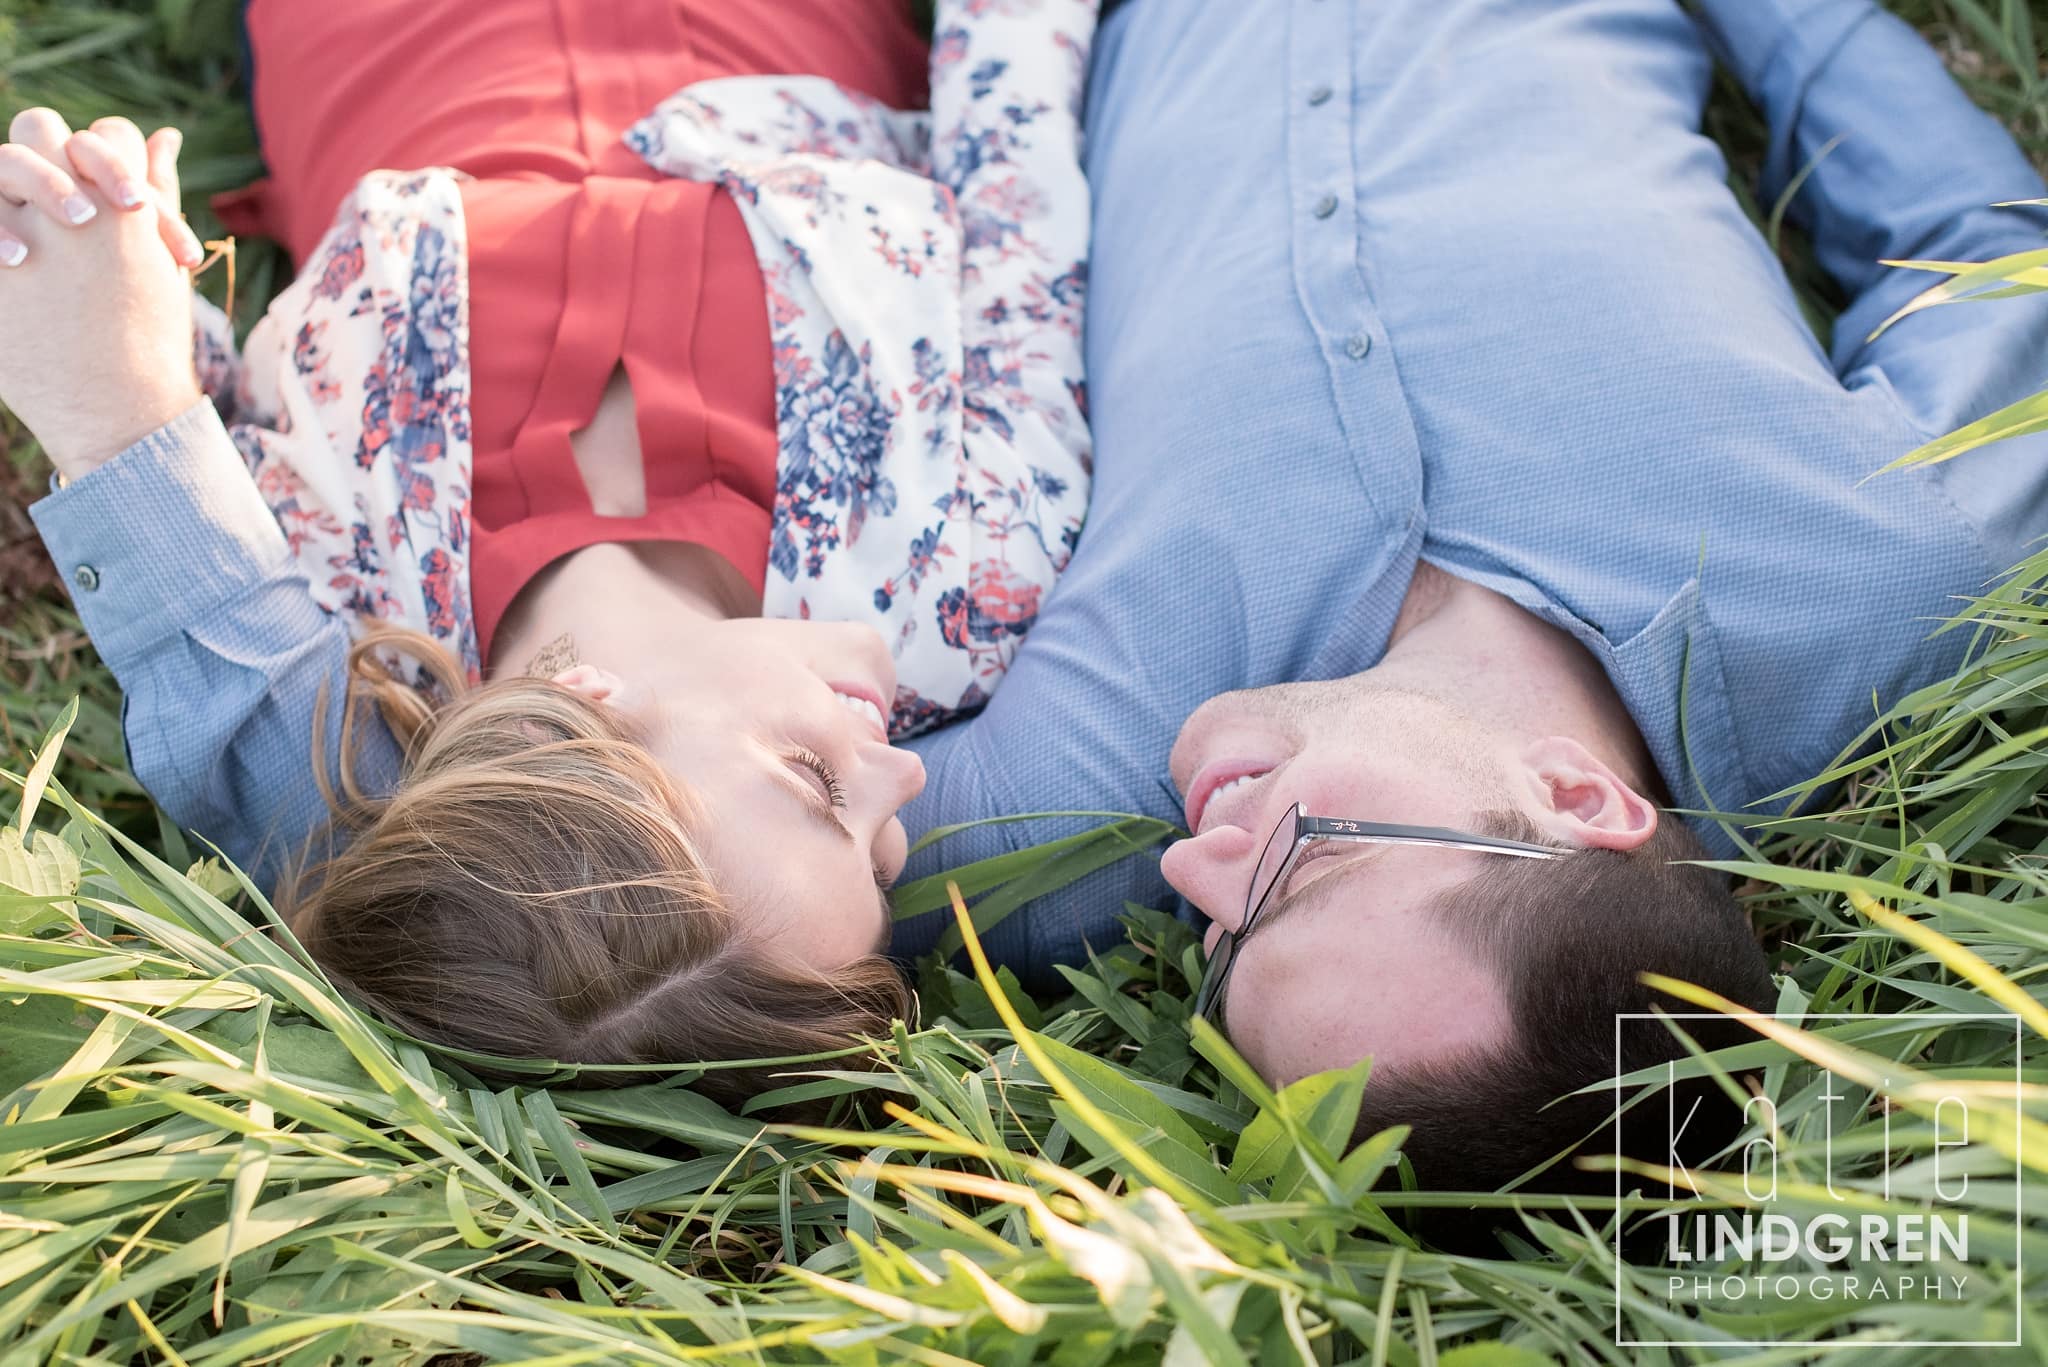 Des Moines Engagement and Wedding Photographer